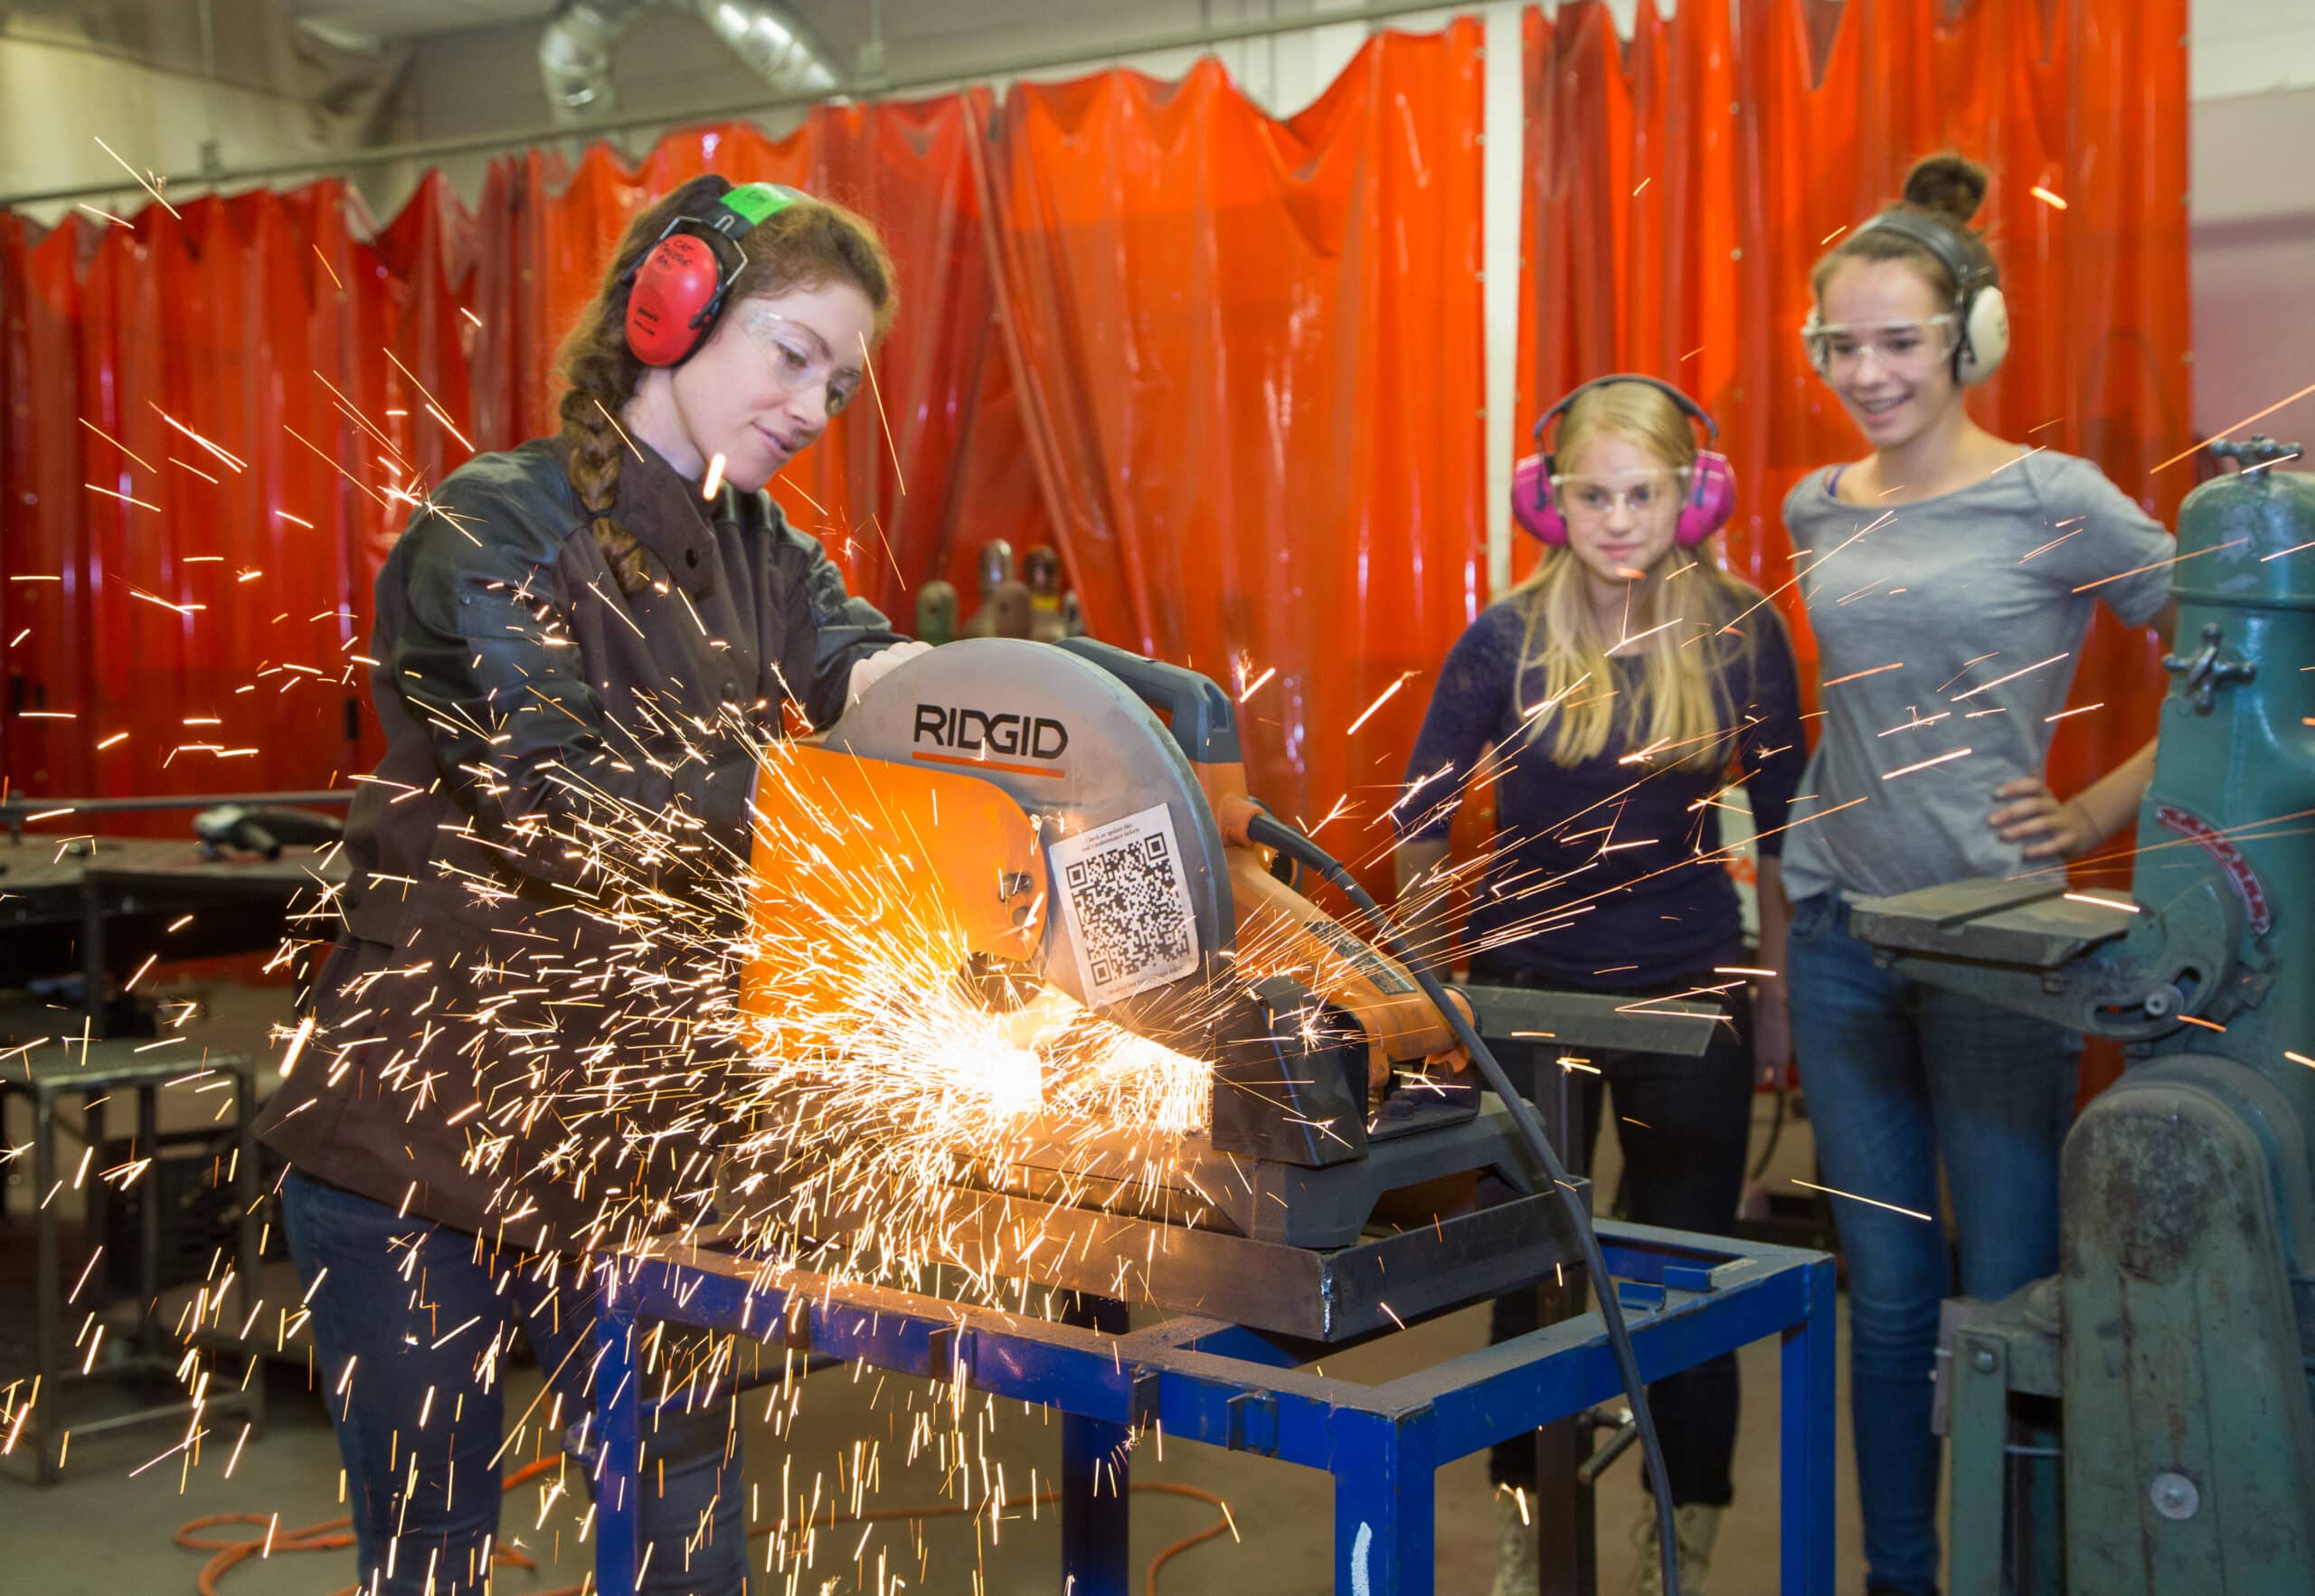 Woman engineer with 2 teenage girls creates sparks as she cuts metal.